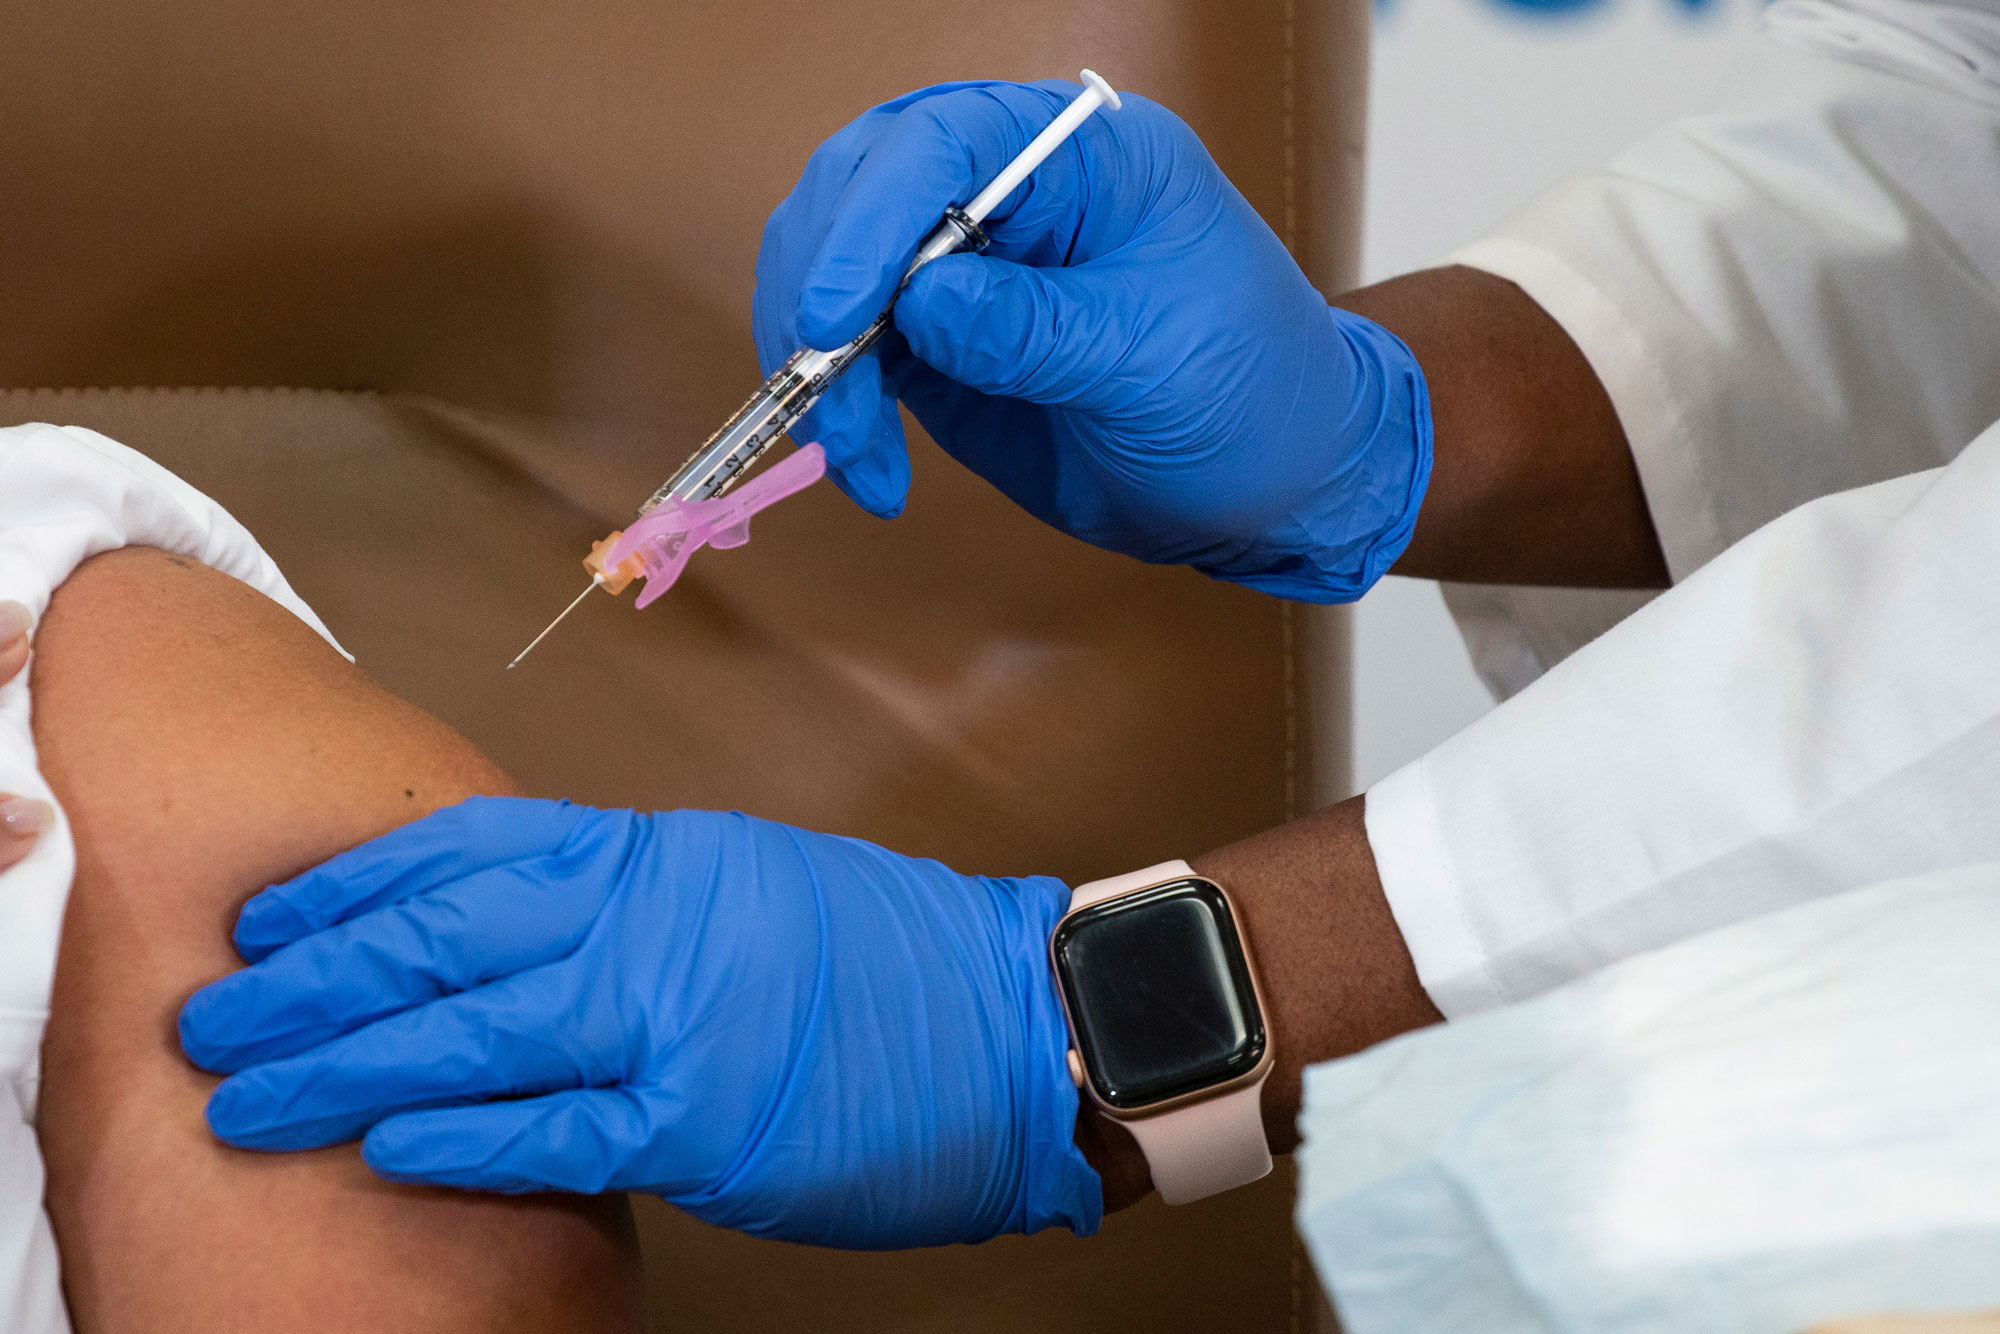 A dose of the Moderna COVID-19 vaccine is administered at Northwell Health's Long Island Jewish Valley Stream hospital in New York City on December 21.